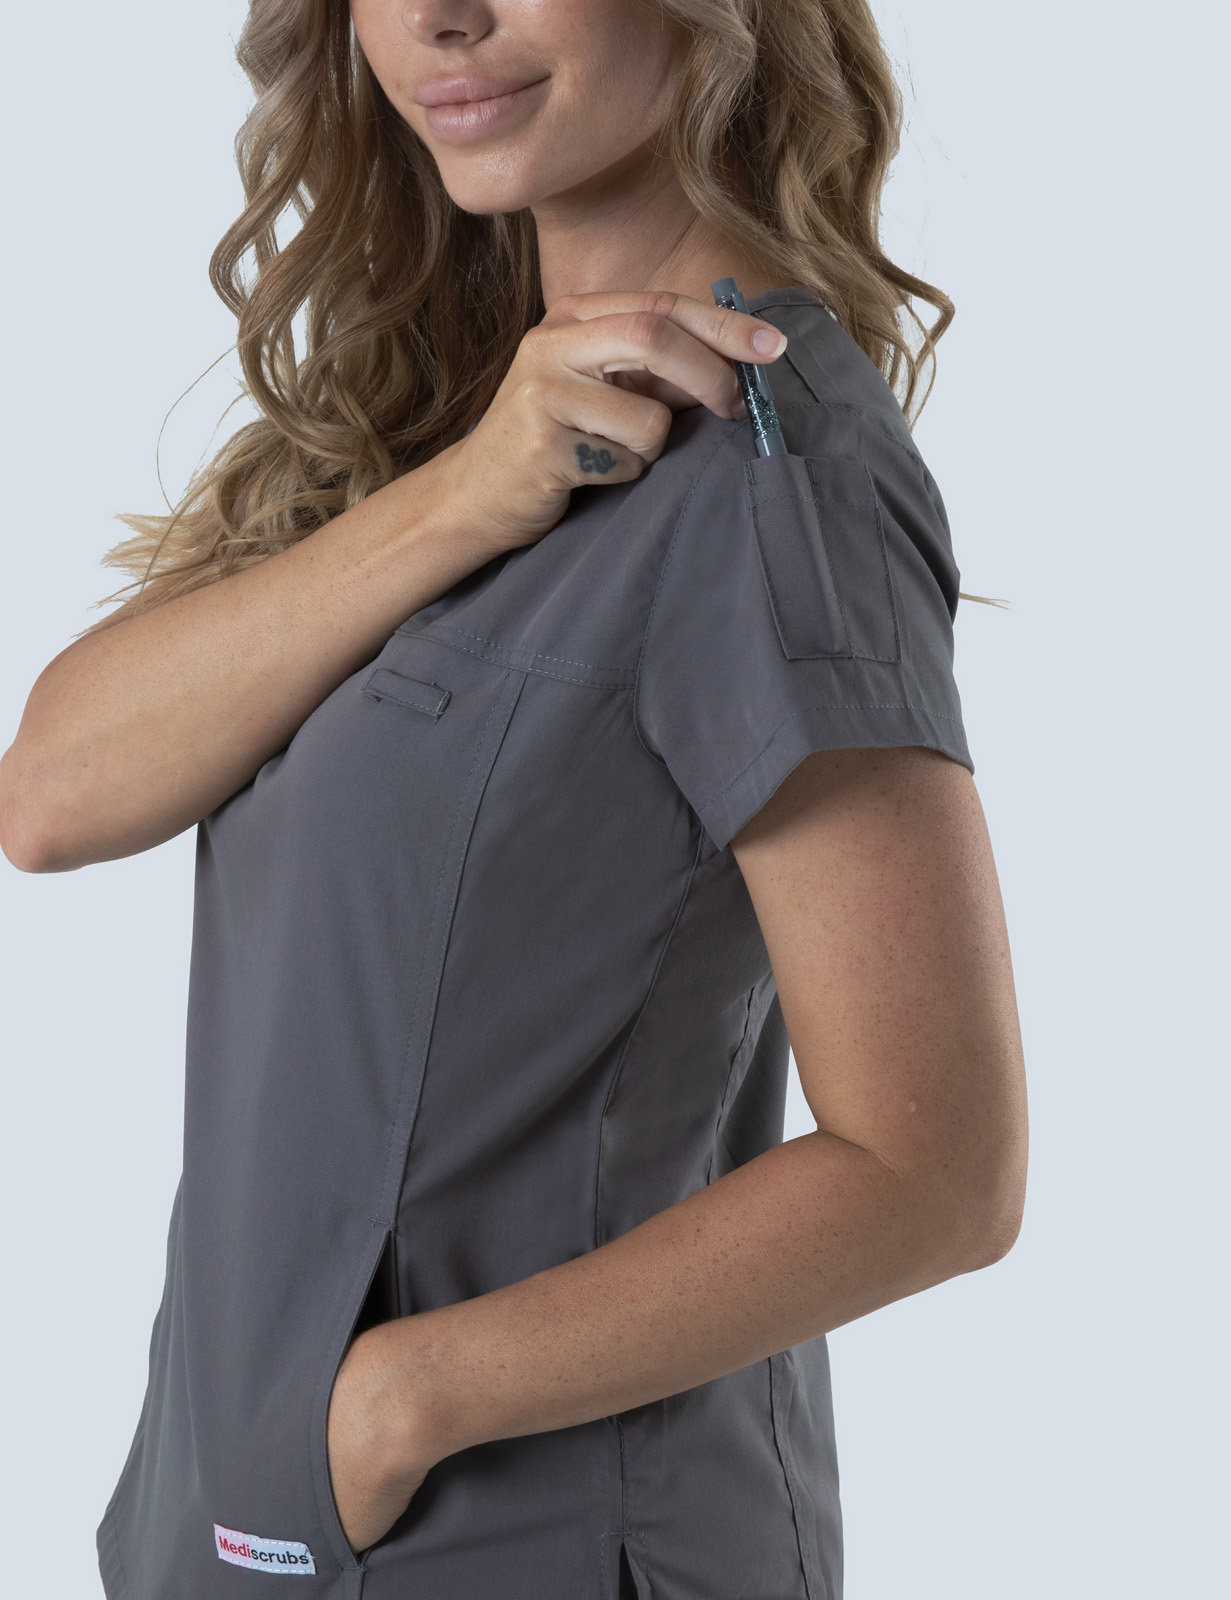 Caloundra Hospital - RN Emergency (Women's Fit Solid Scrub Top and Cargo Pants in Steel Grey incl Logos)